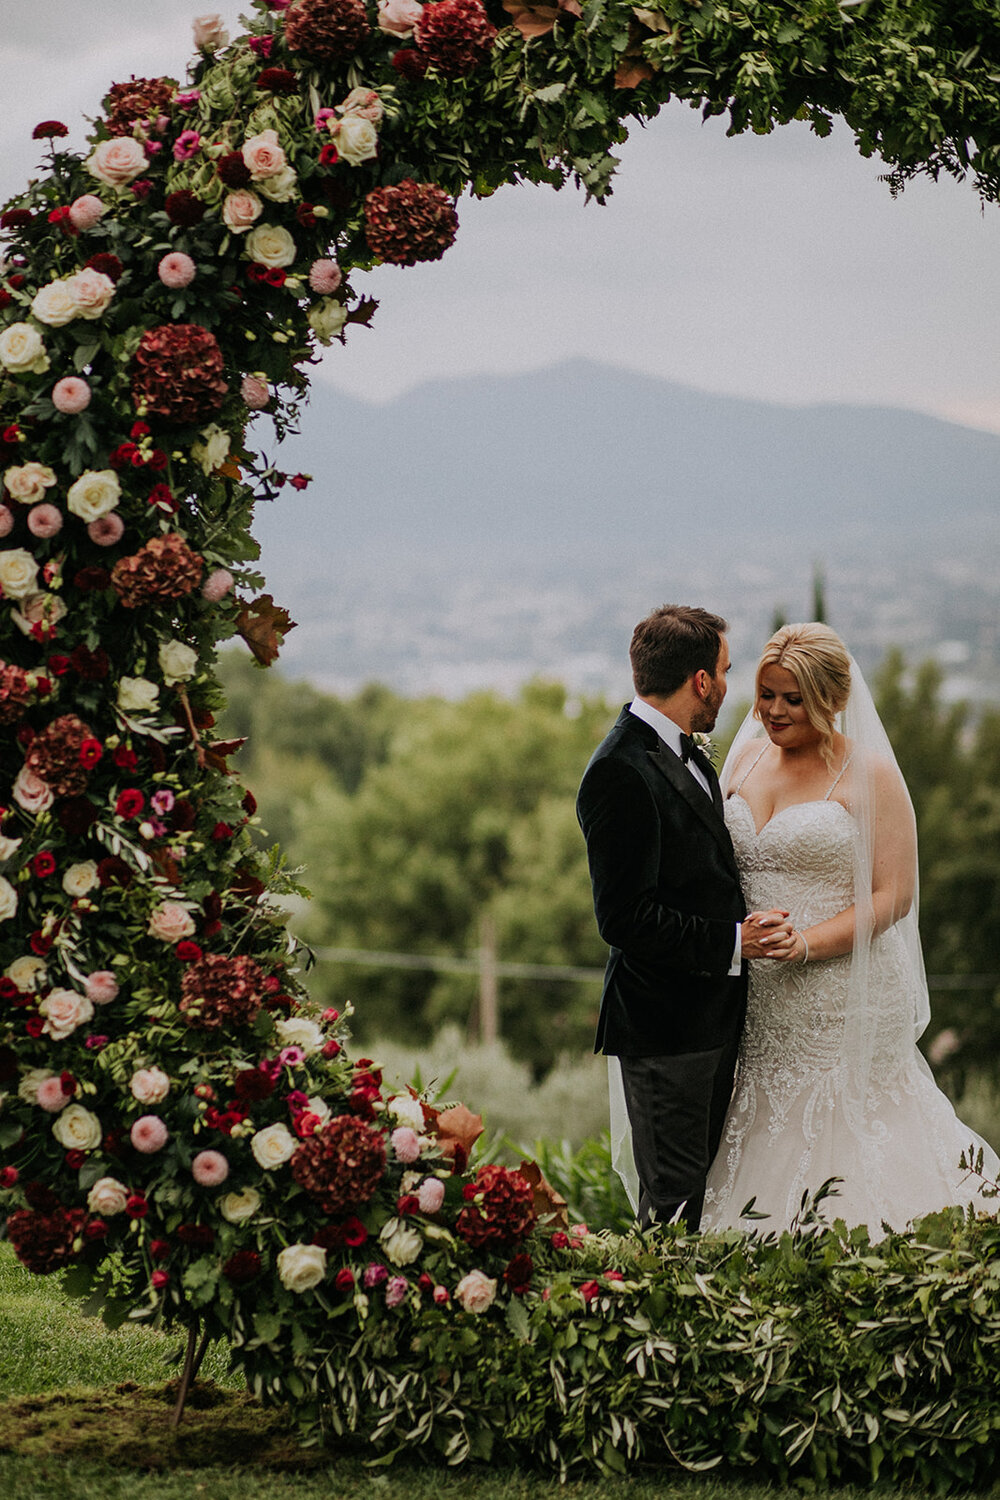 Adele & Mark, October 2019 - A huge thank you for helping to make our wedding dreams come true in Lucca. Our guests were blown away with the venue, food music and flowers and it was just magical! We feel you were able to read our requests perfectly and we always felt everything was so easy.Thank you for your time and patience xxx